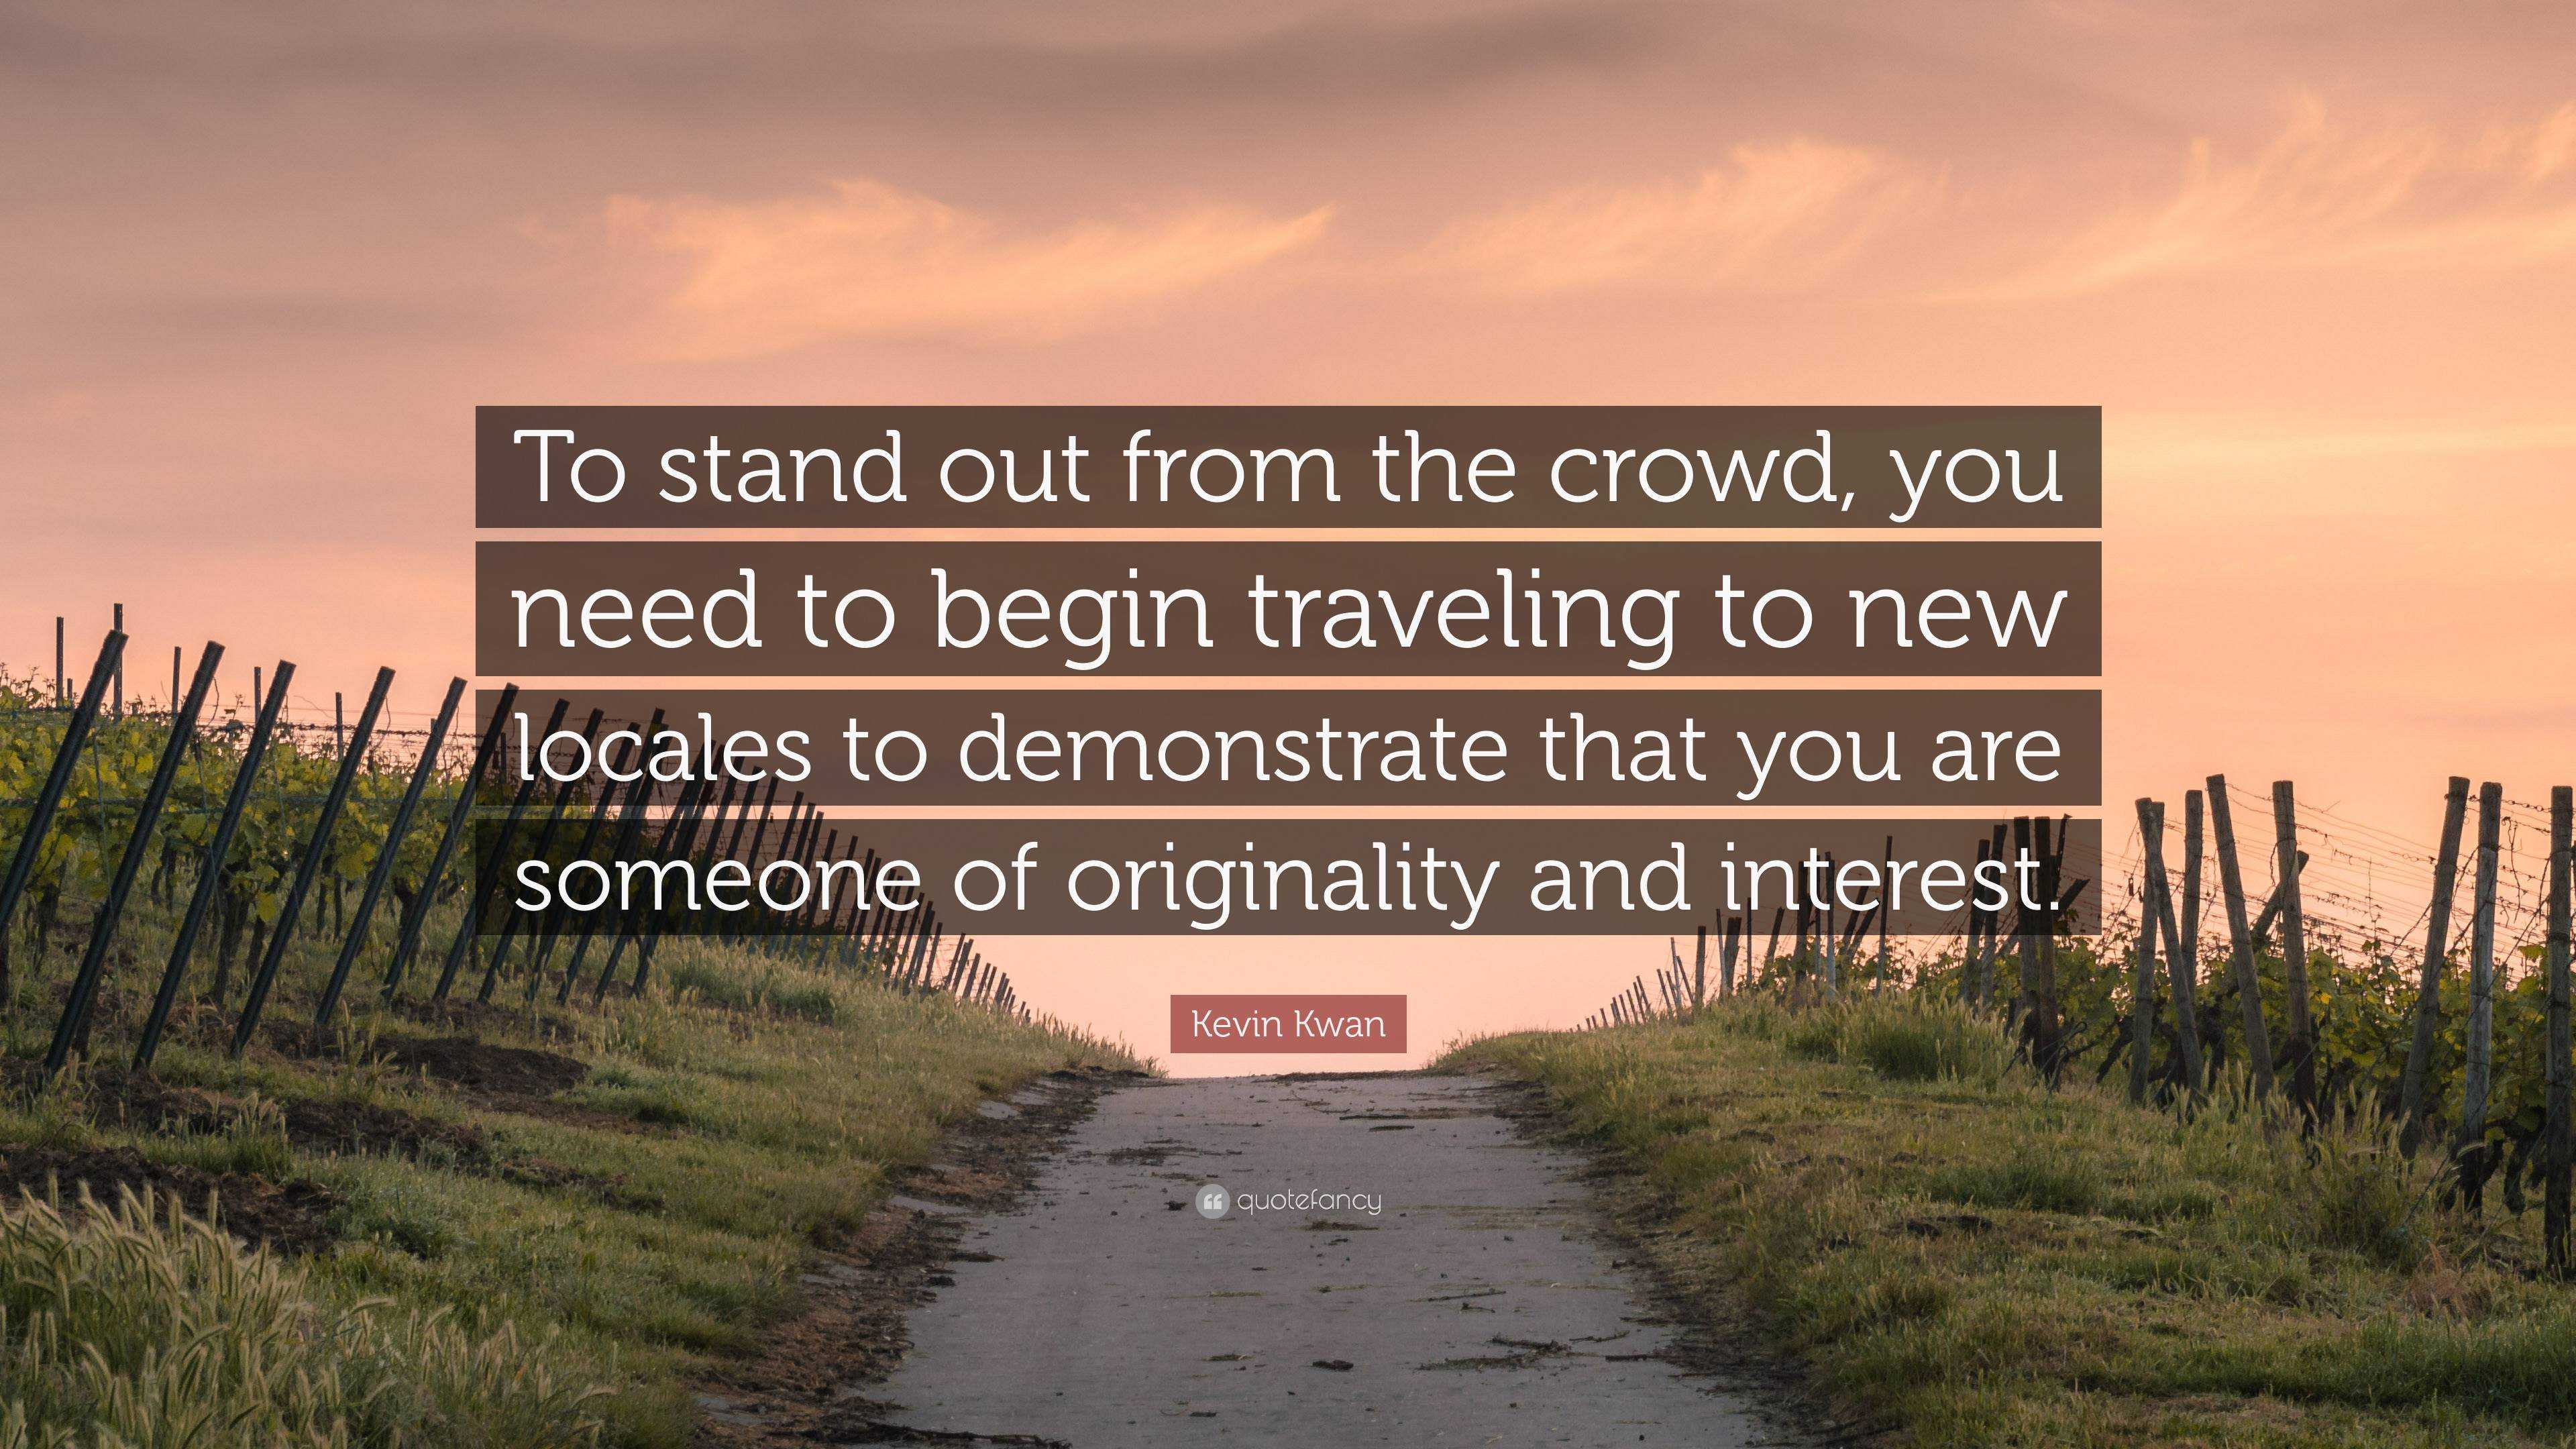 75 Stand Out Quotes On Being Different From The Crowd – The Random Vibez